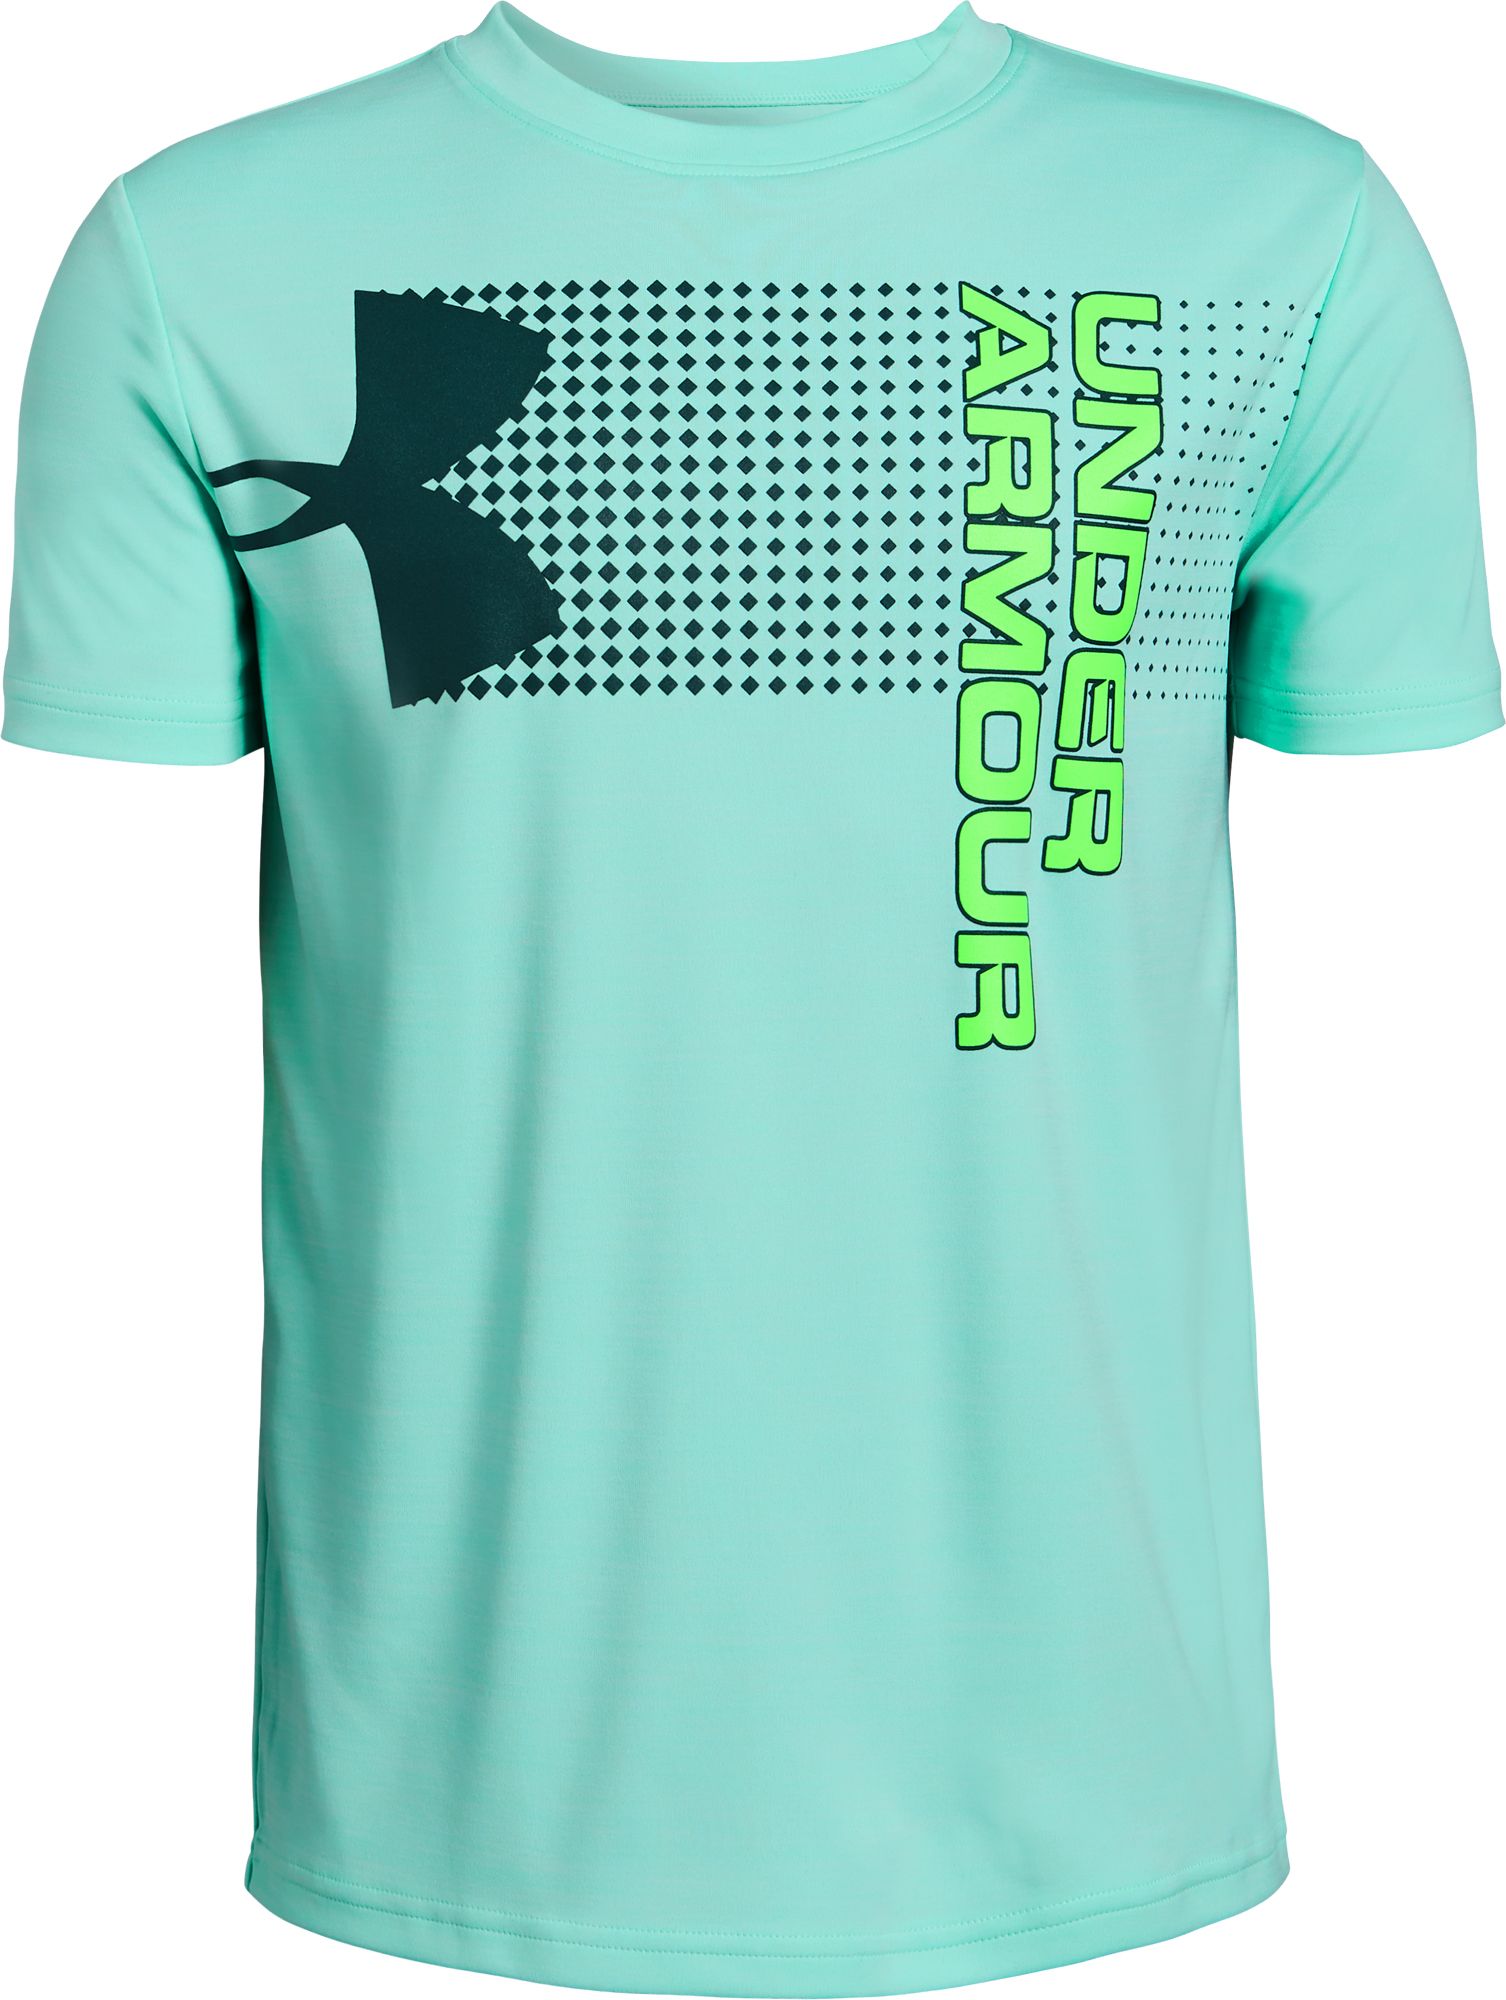 turquoise under armour shirt